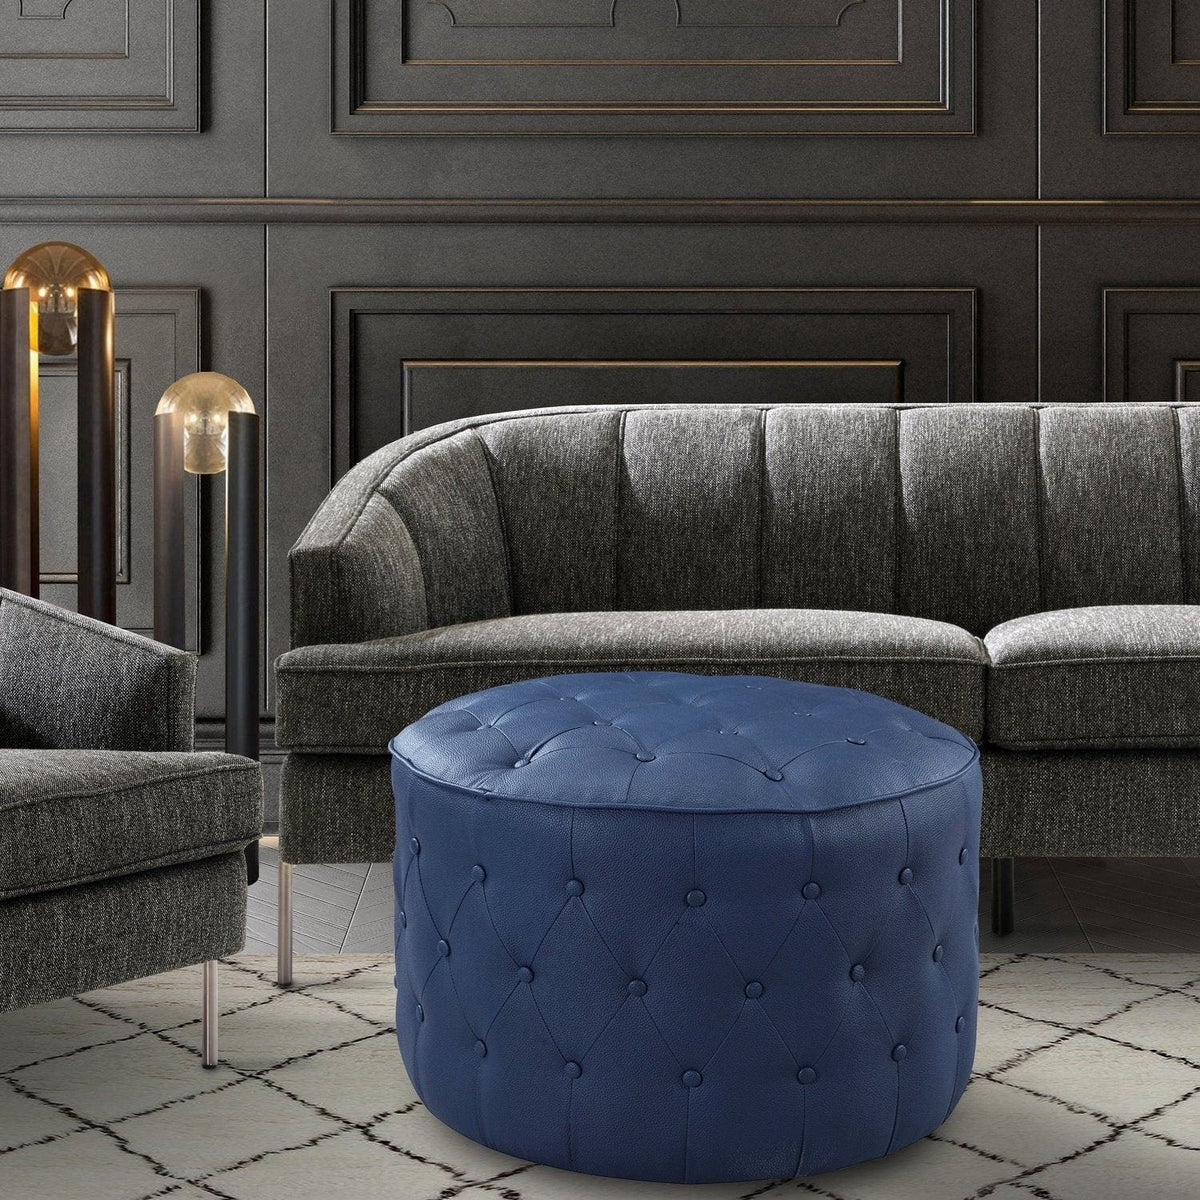 Iconic Home Marley Tufted Faux Leather Round Ottoman Pouf Blue